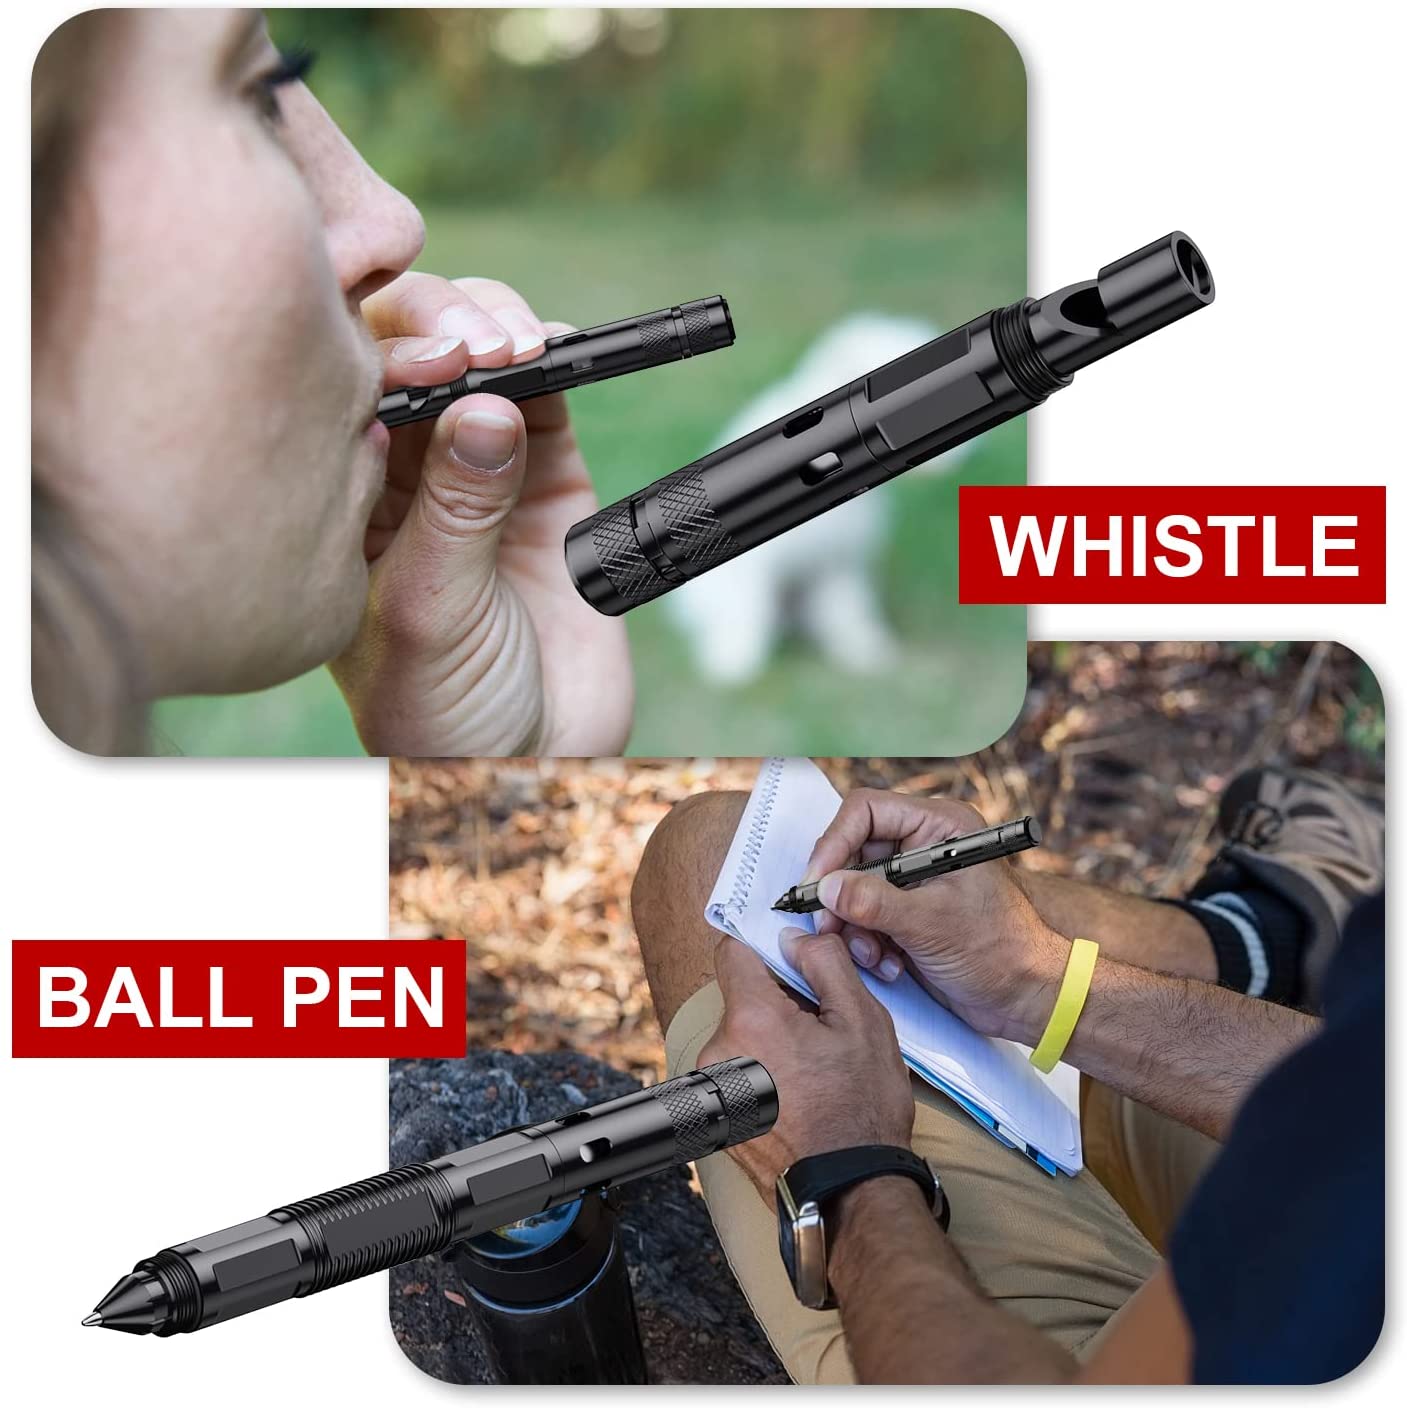 Gifts for Dad Men Husband, LETMY Tactical Pen Survival Gear(8-In-1), Stocking Stuffers Gift for Men, LED Flashlight, Cool Gifts for Dad, Unique Gifts Ideas for Boyfriend Father Him Women